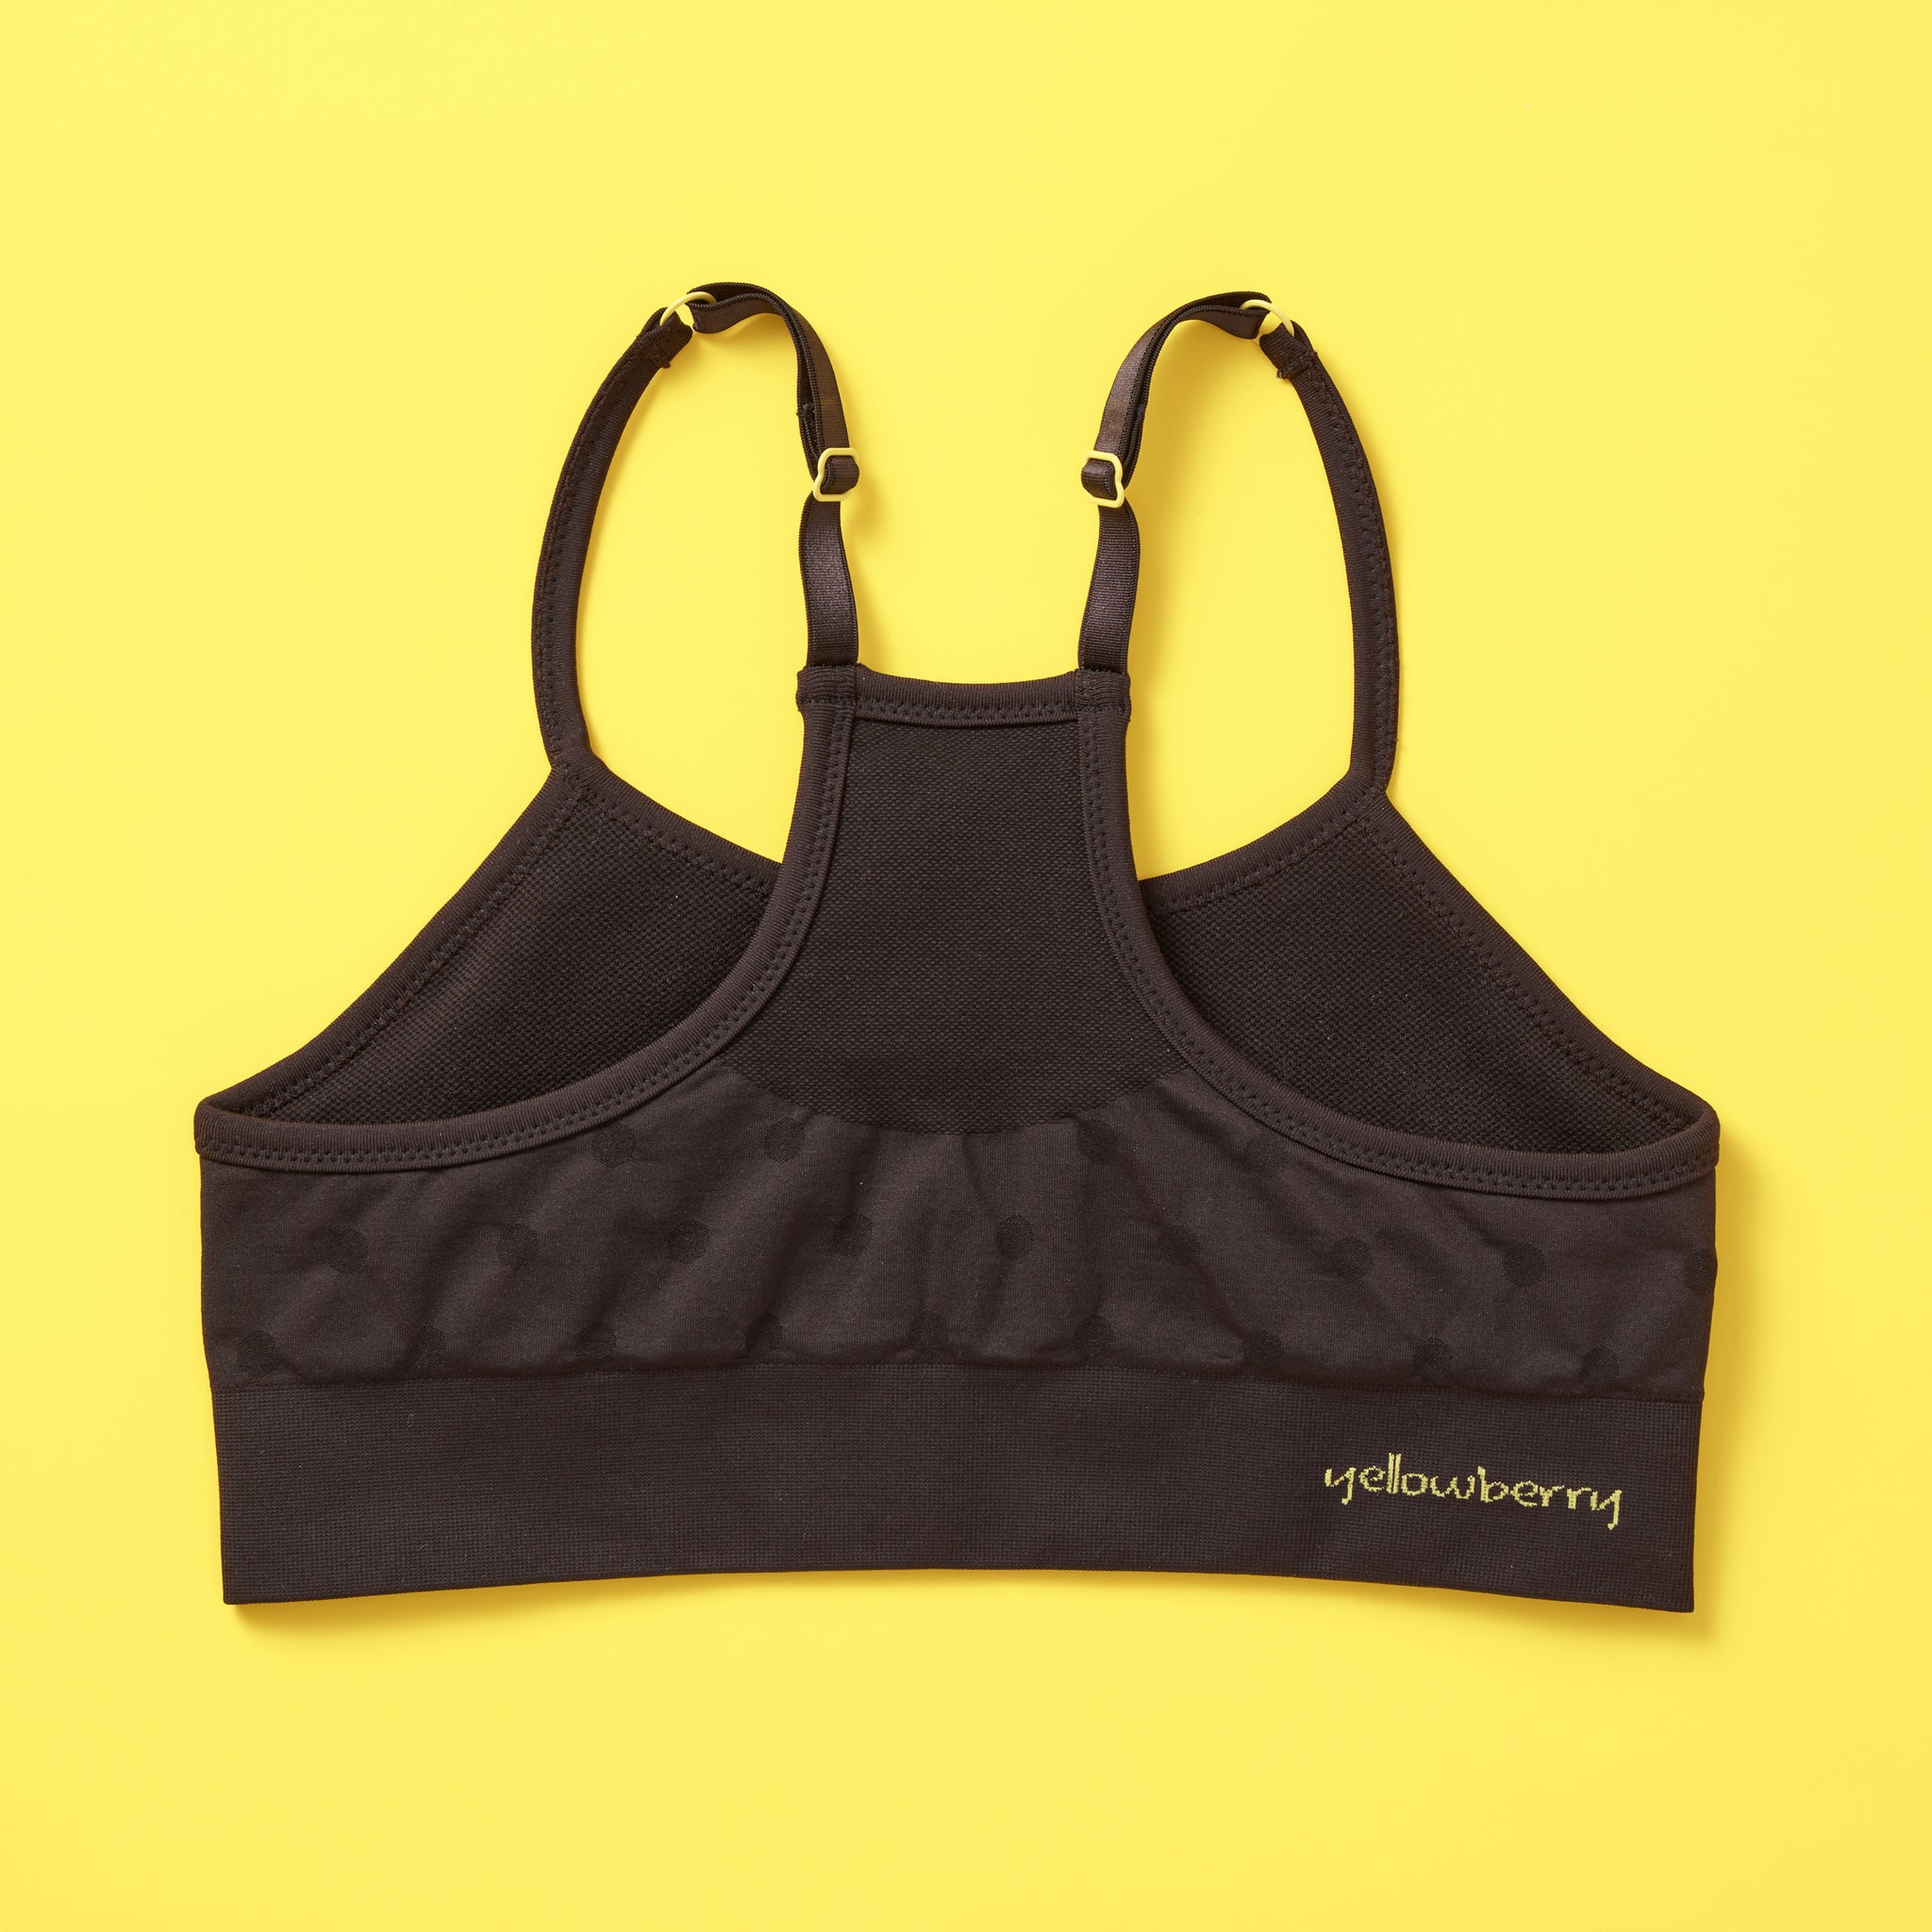 Yellowberry - Shop by Brand